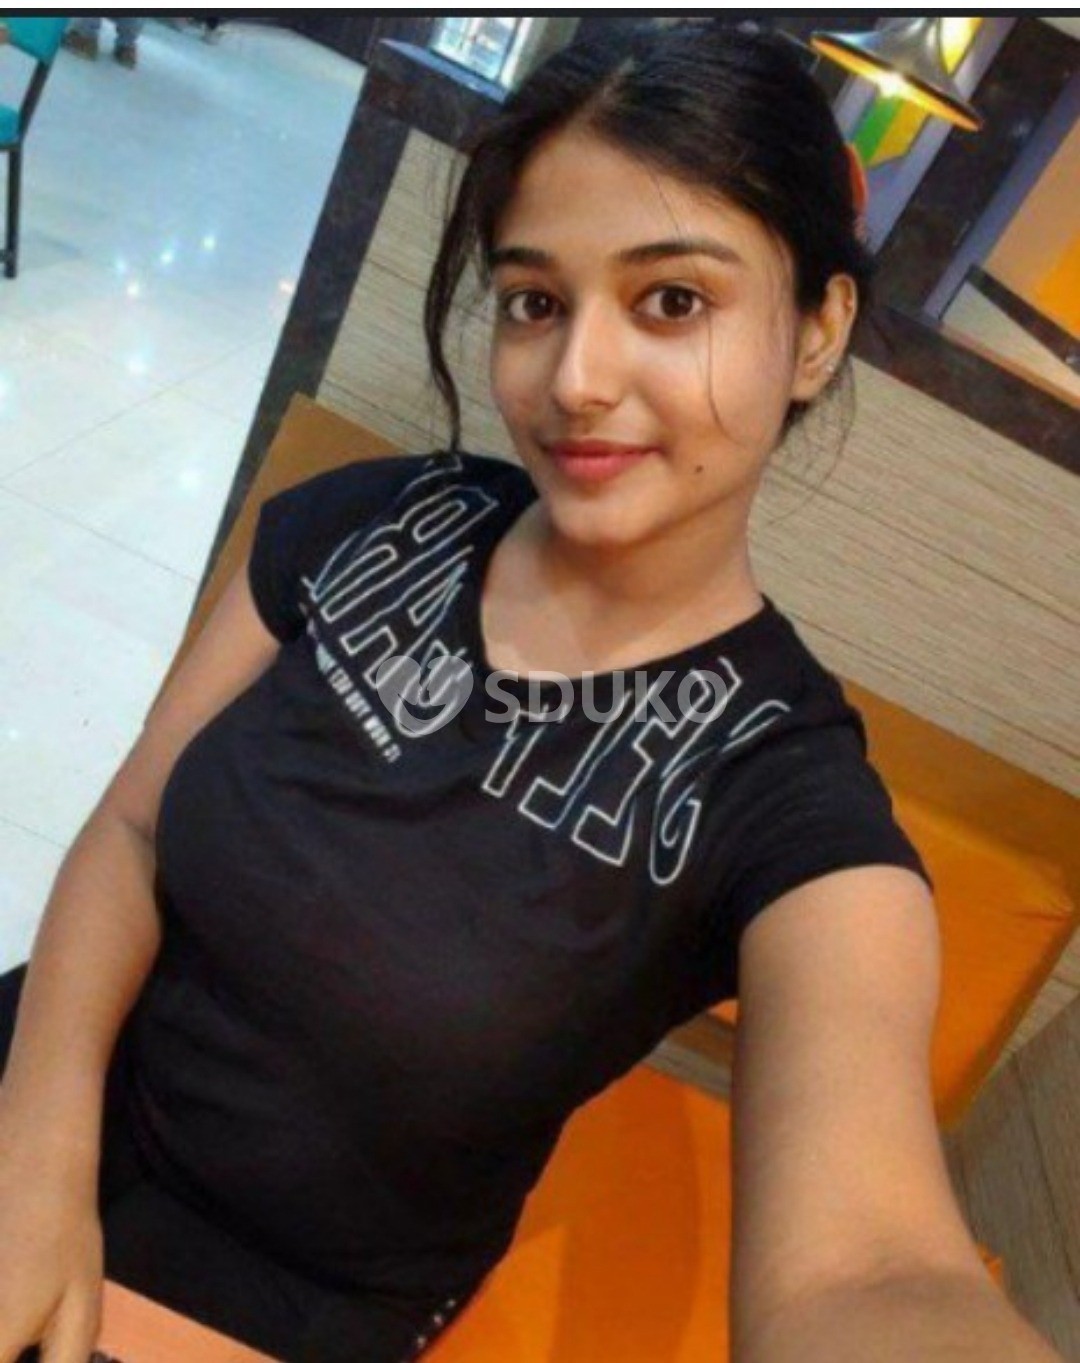 BHIMAVARAM 💙🔥MY SELF DIVYA UNLIMITED SEX CUTE BEST SERVICE AND SAFE AND SECURE AND 24 HR AVAILABLE